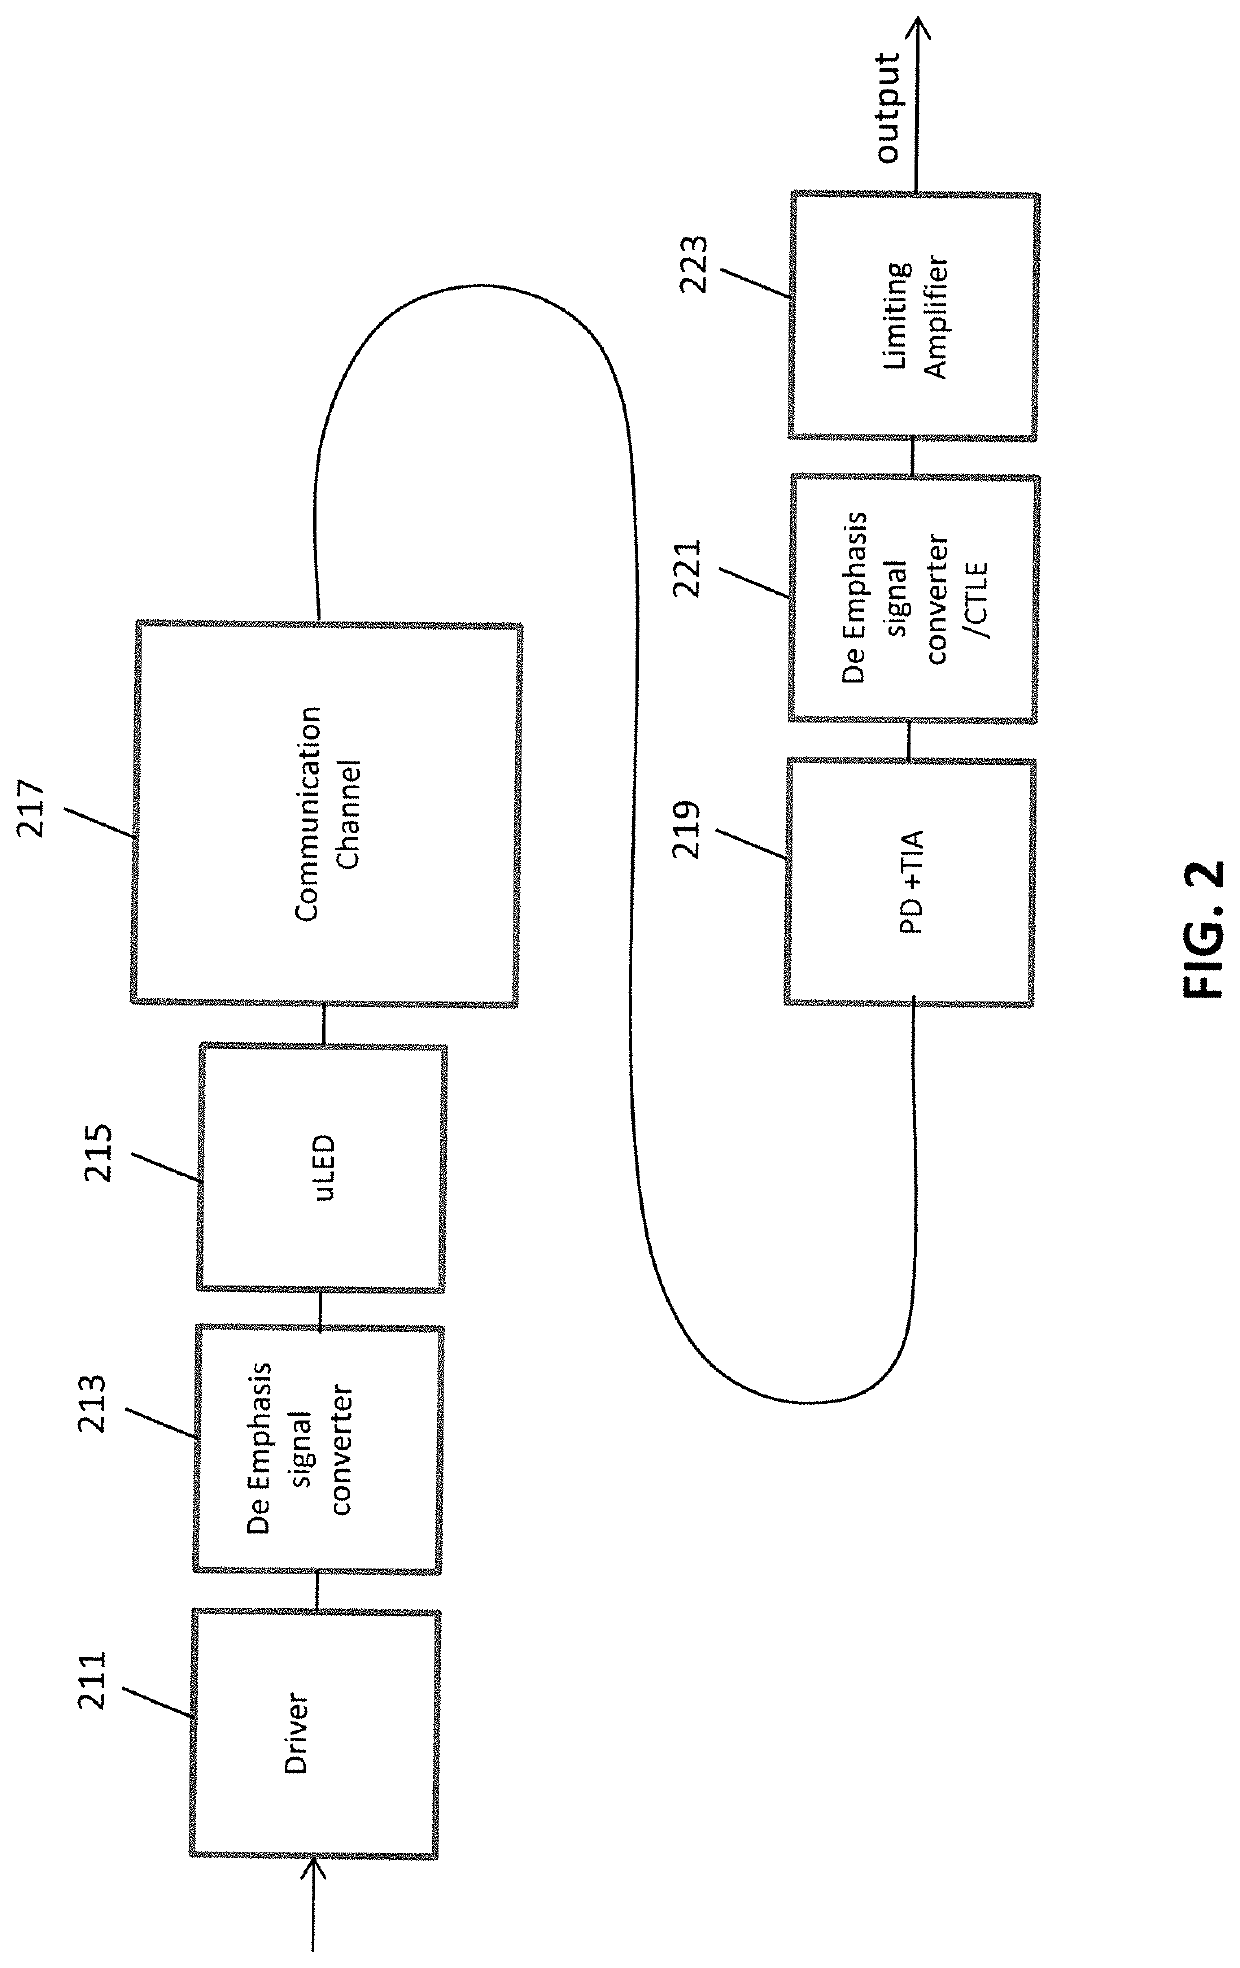 Optical transceiver design for short distance communication systems based on microLEDs